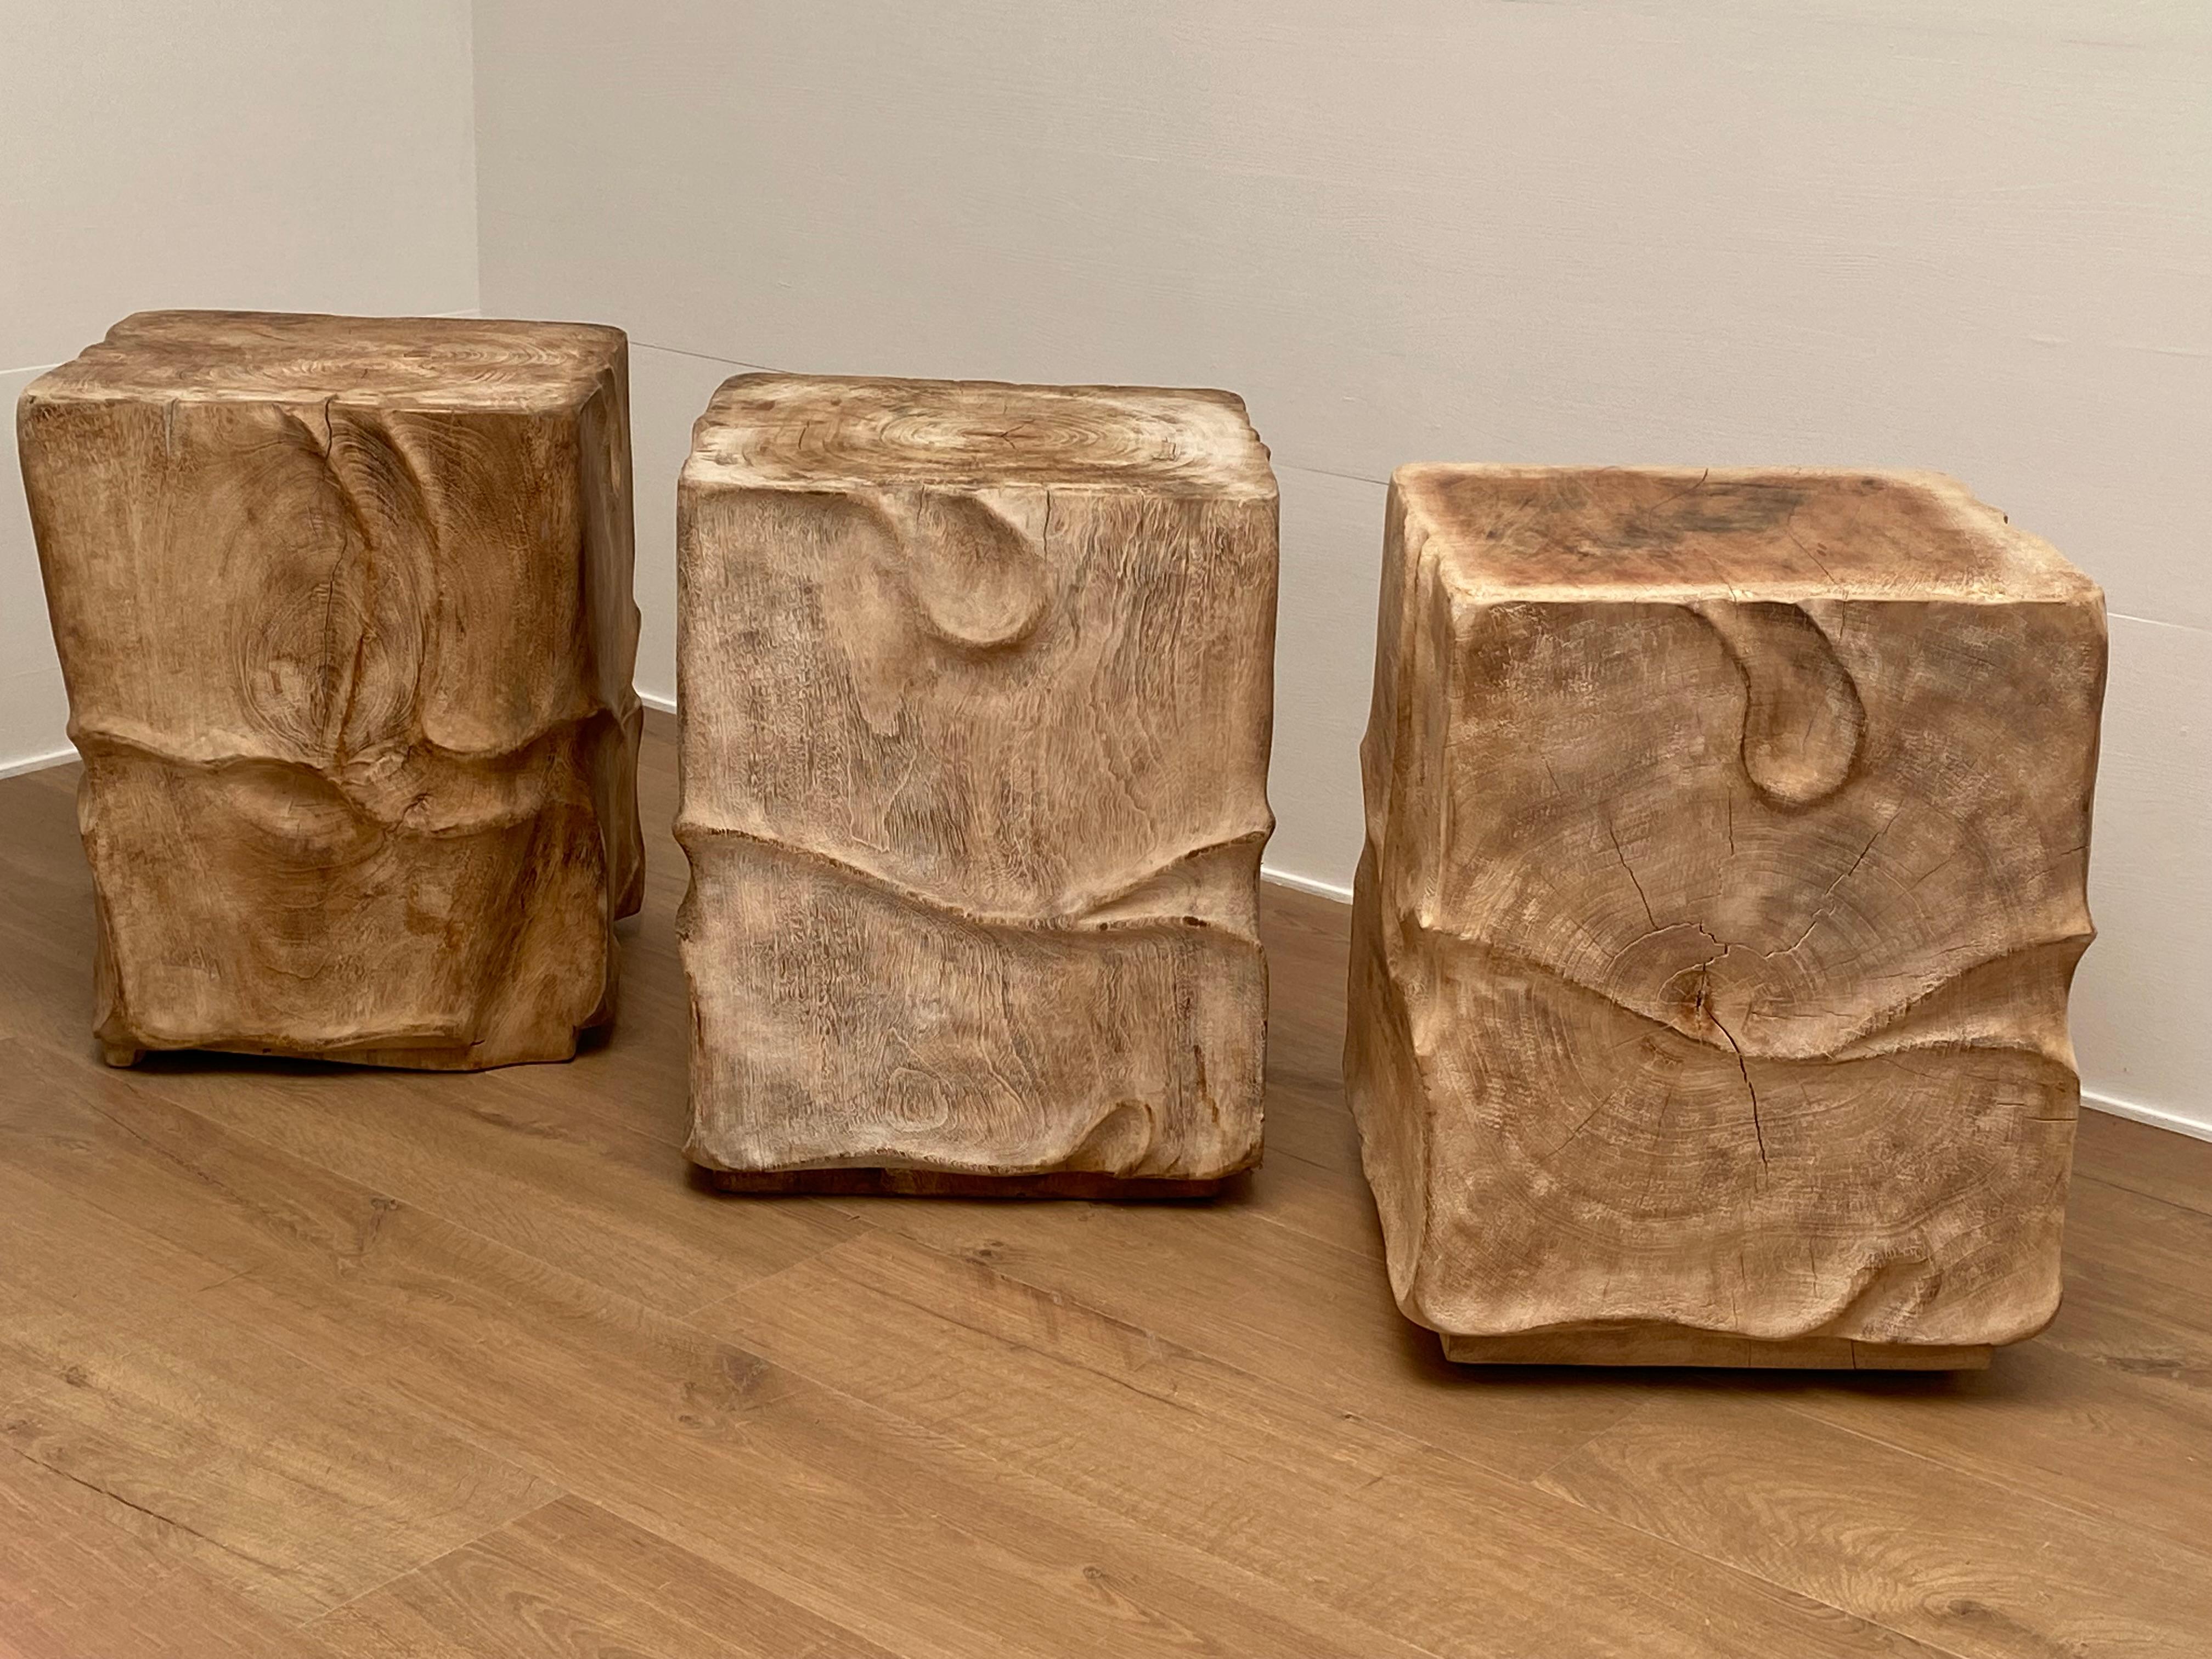 Beautiful Set of 3 Wooden Blocks in SUAR Wood,
decorated with nice, simple carvings,
can be used as side tables or seating ,
can also be used as bed-tables,
nice shine and patina of the Suar Wood.